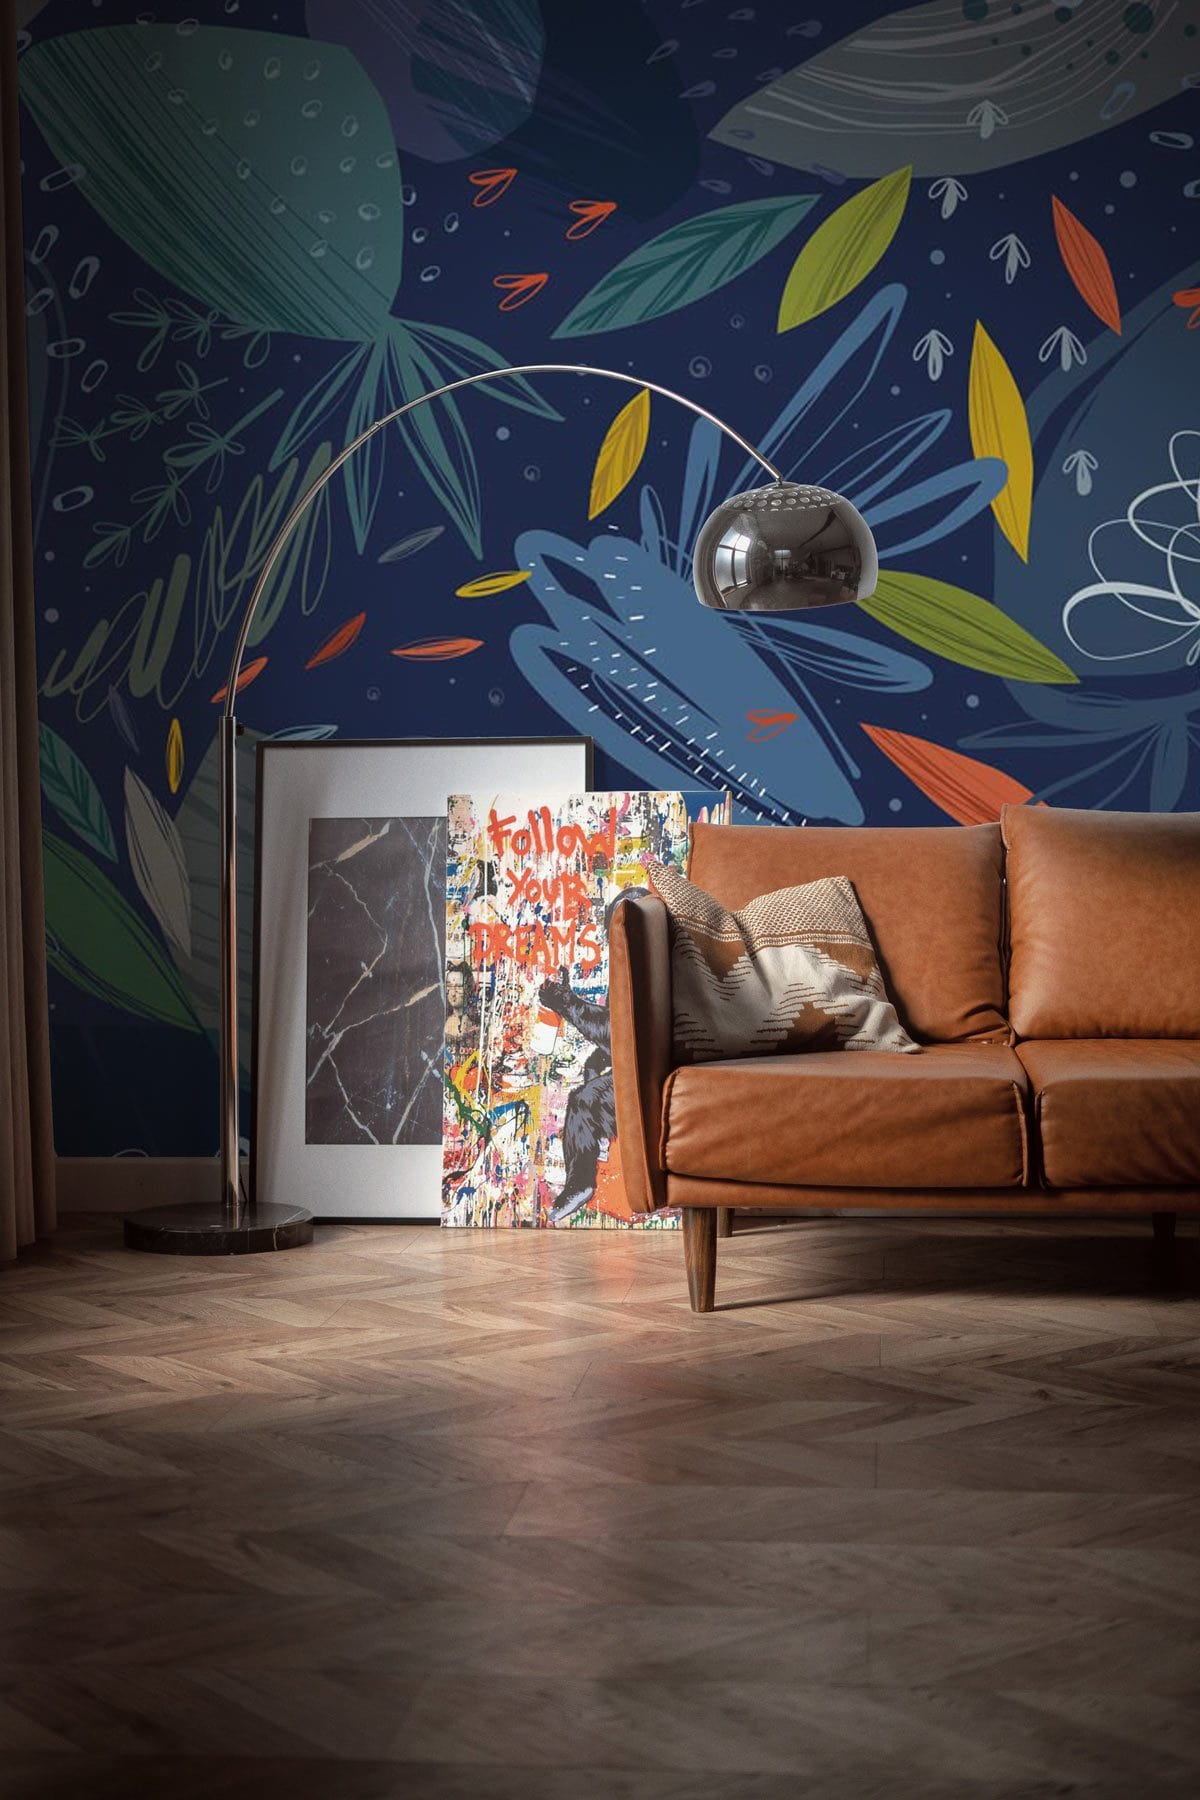 Wallpaper mural featuring dark blue leaves, perfect for decorating the living room